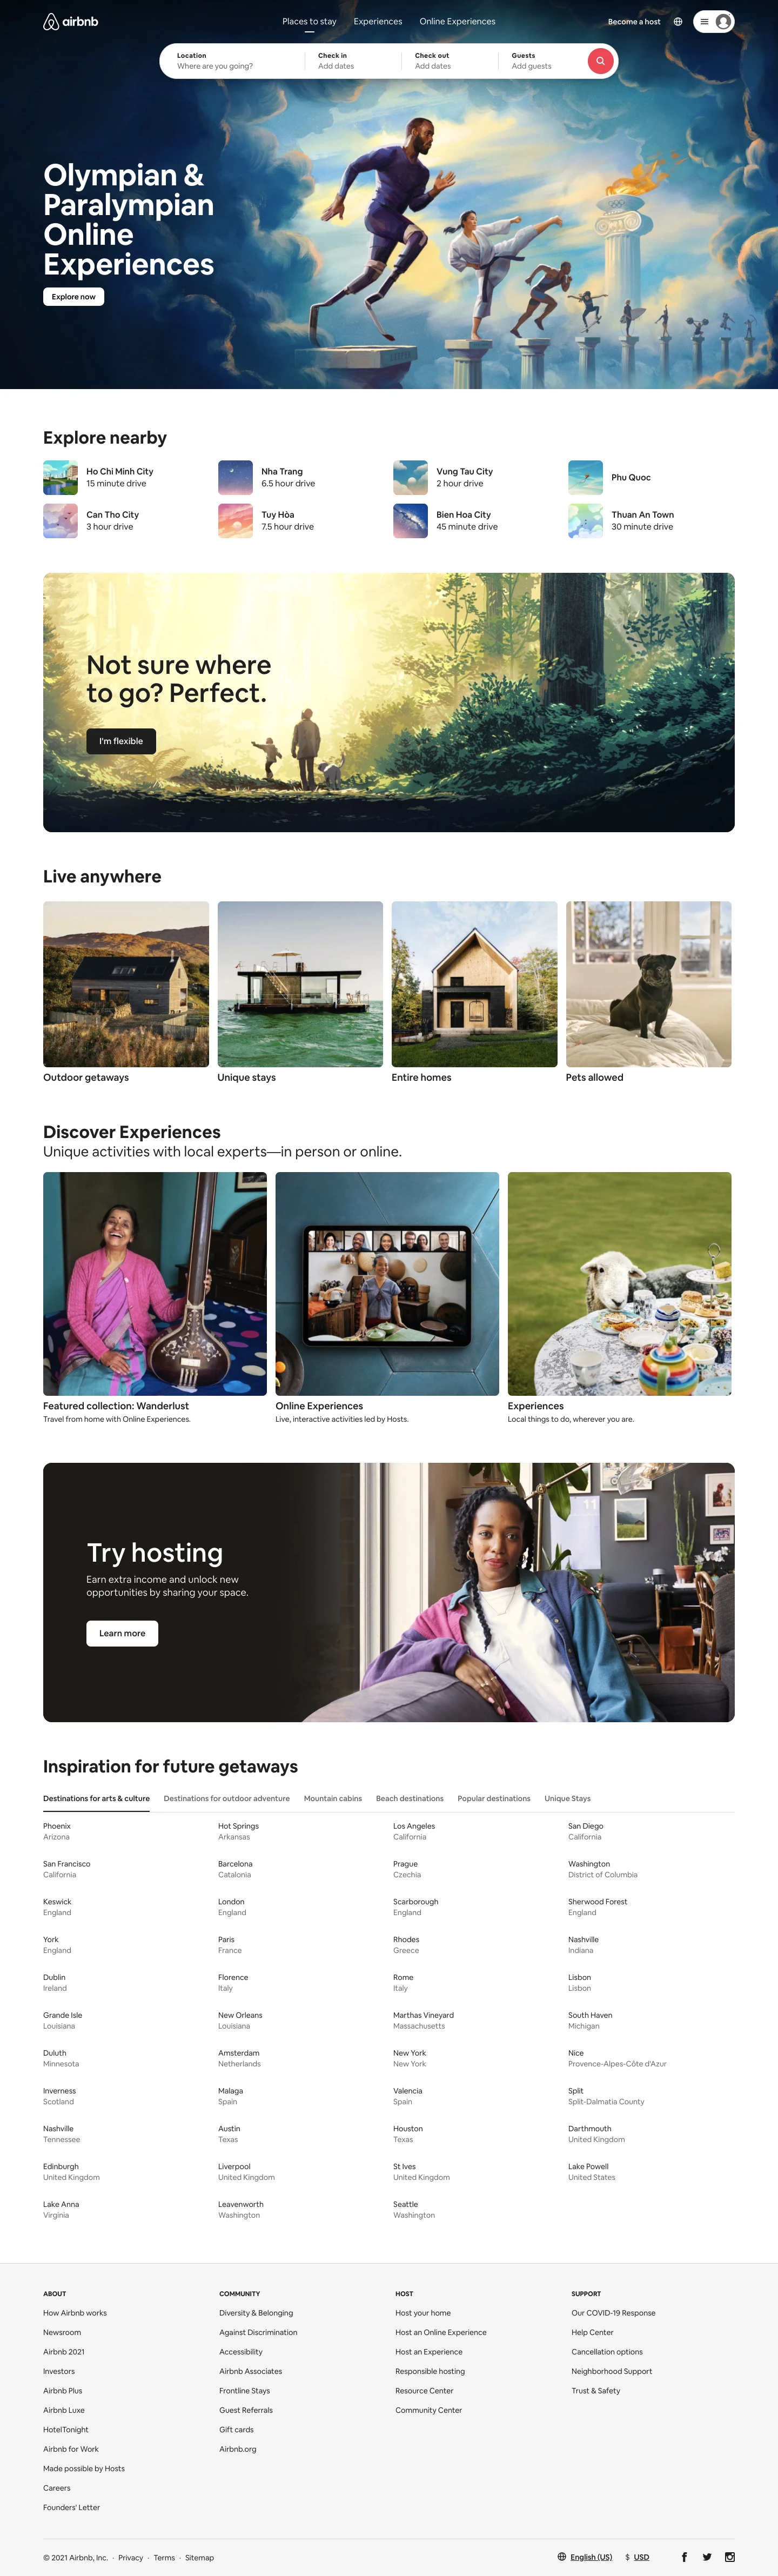 Airbnb Landing Page Example: Find vacation rentals, cabins, beach houses, unique homes and experiences around the world - all made possible by hosts on Airbnb.